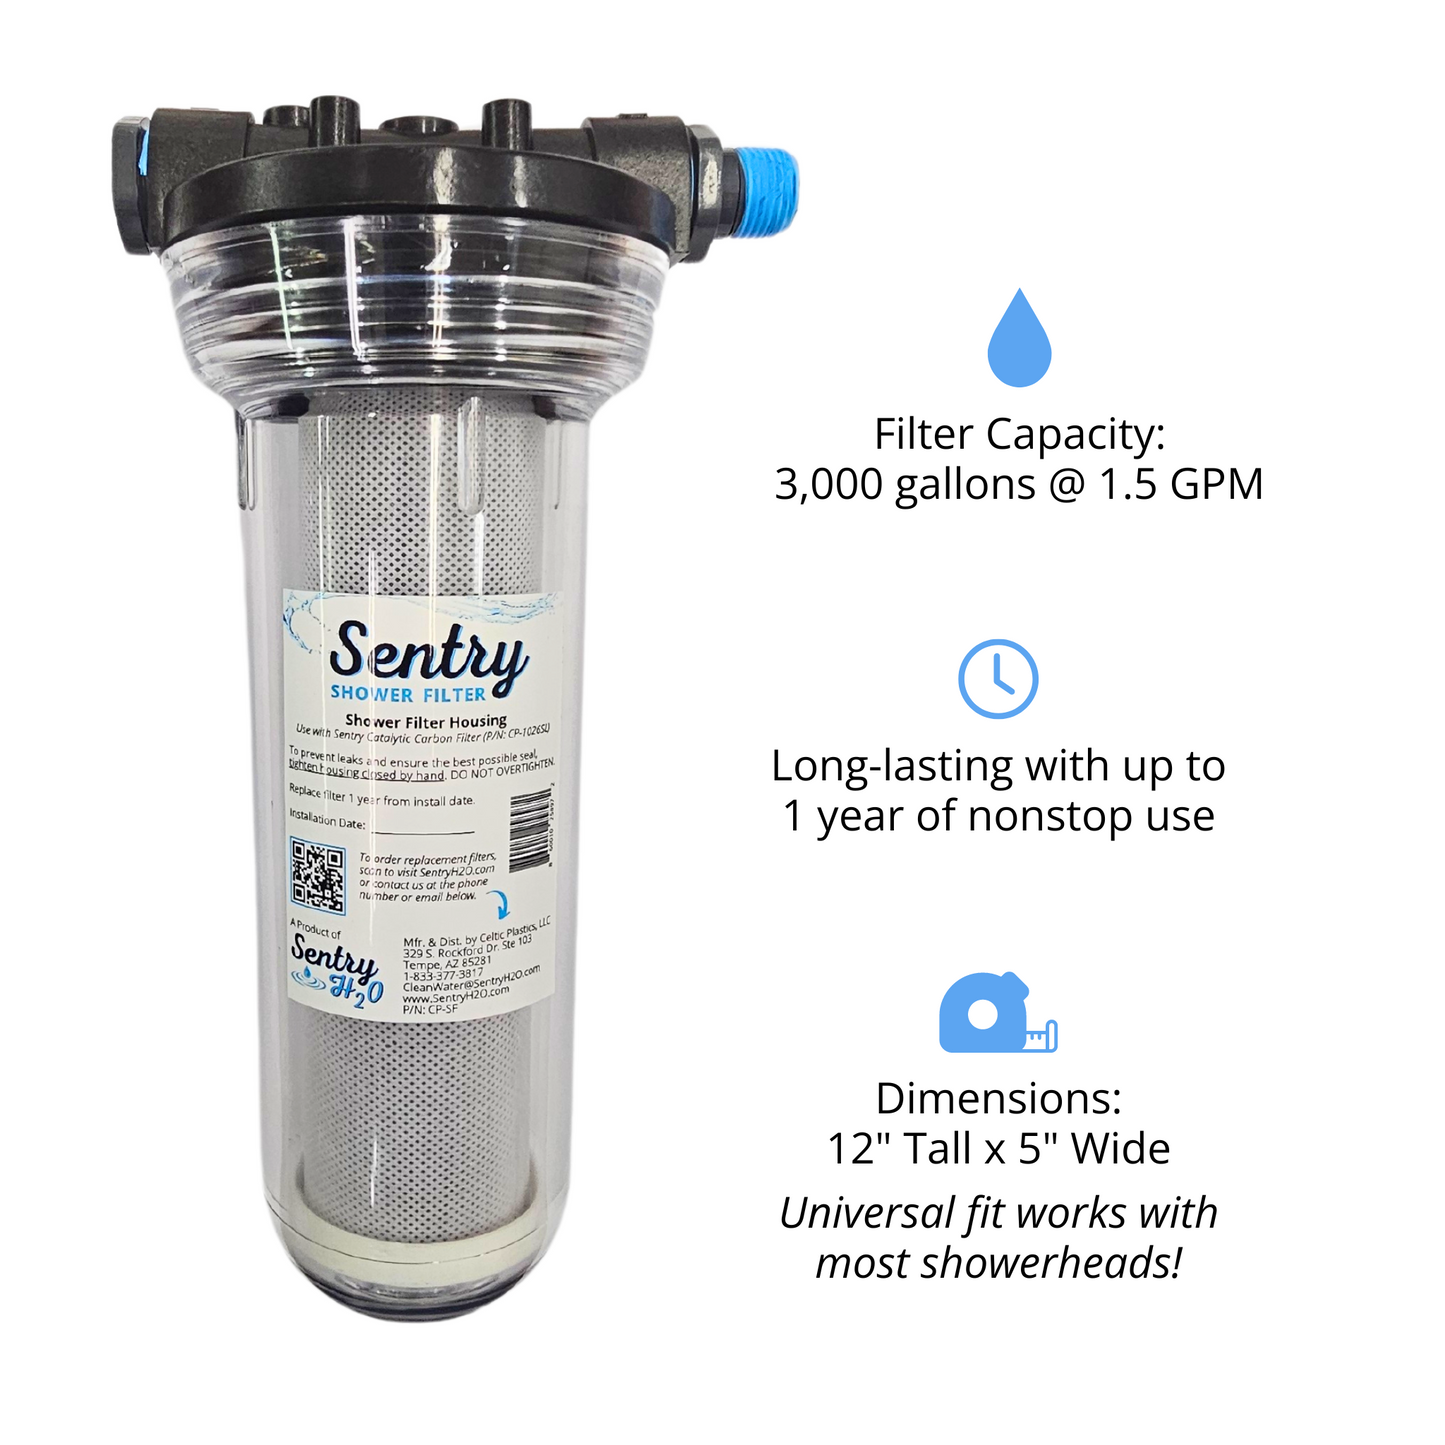 Sentry shower filter with specifications